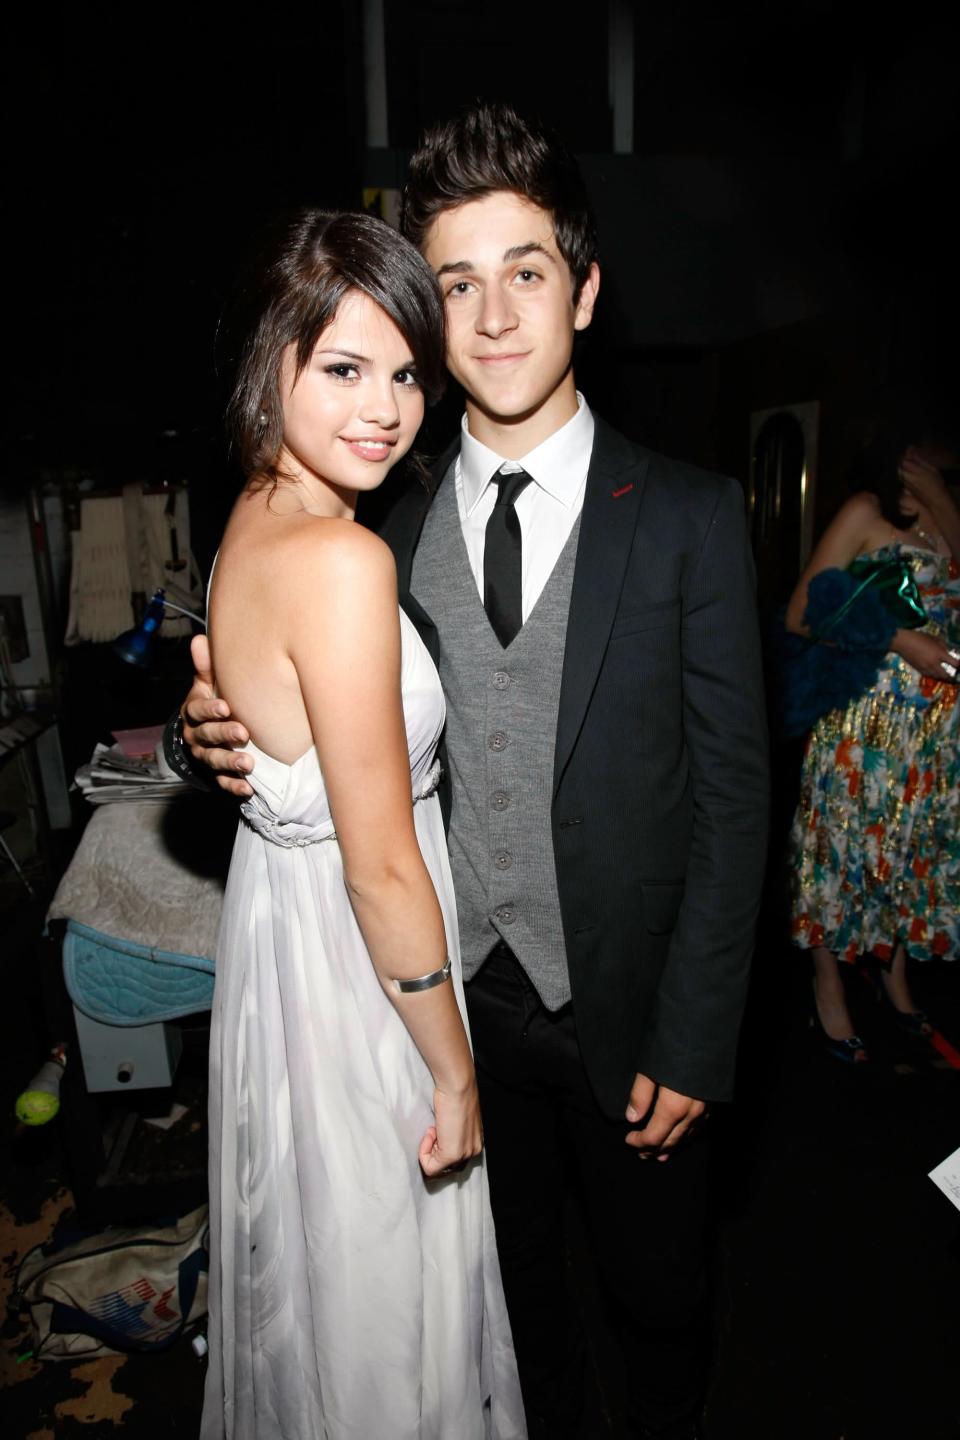 <p>Henrie played Gomez's TV brother on Disney Channel's "Wizards of Waverly Place," and the two <a href="https://www.popsugar.com/celebrity/Selena-Gomez-David-Henrie-Disneyland-July-2018-45011679" class="link " rel="nofollow noopener" target="_blank" data-ylk="slk:remained good friends">remained good friends</a> after the show ended in 2012. In 2014, <a href="https://www.seventeen.com/celebrity/a25693/selena-gomez-david-henrie-date/" class="link " rel="nofollow noopener" target="_blank" data-ylk="slk:Seventeen reported">Seventeen reported</a> that they went on a date, but it appears nothing ever came of it. In 2017, <a href="https://www.popsugar.com/celebrity/Selena-Gomez-David-Henrie-Wedding-Pictures-43462785" class="link " rel="nofollow noopener" target="_blank" data-ylk="slk:Gomez attended Henrie's wedding">Gomez attended Henrie's wedding</a> where he tied the knot with model Maria Cahill, with whom he shares his <a href="https://www.popsugar.com/family/David-Henrie-Maria-Cahill-Welcome-First-Baby-2019-45940889" class="link " rel="nofollow noopener" target="_blank" data-ylk="slk:3-year-old daughter Pia">3-year-old daughter Pia</a> and 1-year-old son James. Gomez and Henrie <a href="https://www.popsugar.com/entertainment/david-henrie-wizards-of-waverly-place-interview-47711014" class="link " rel="nofollow noopener" target="_blank" data-ylk="slk:reunited again in August 2020">reunited again in August 2020</a> to promote their film "<a href="https://www.popsugar.com/entertainment/david-henrie-this-is-the-year-film-interview-47721878" class="link " rel="nofollow noopener" target="_blank" data-ylk="slk:This Is the Year">This Is the Year</a>," which the latter directed and the former produced.</p>